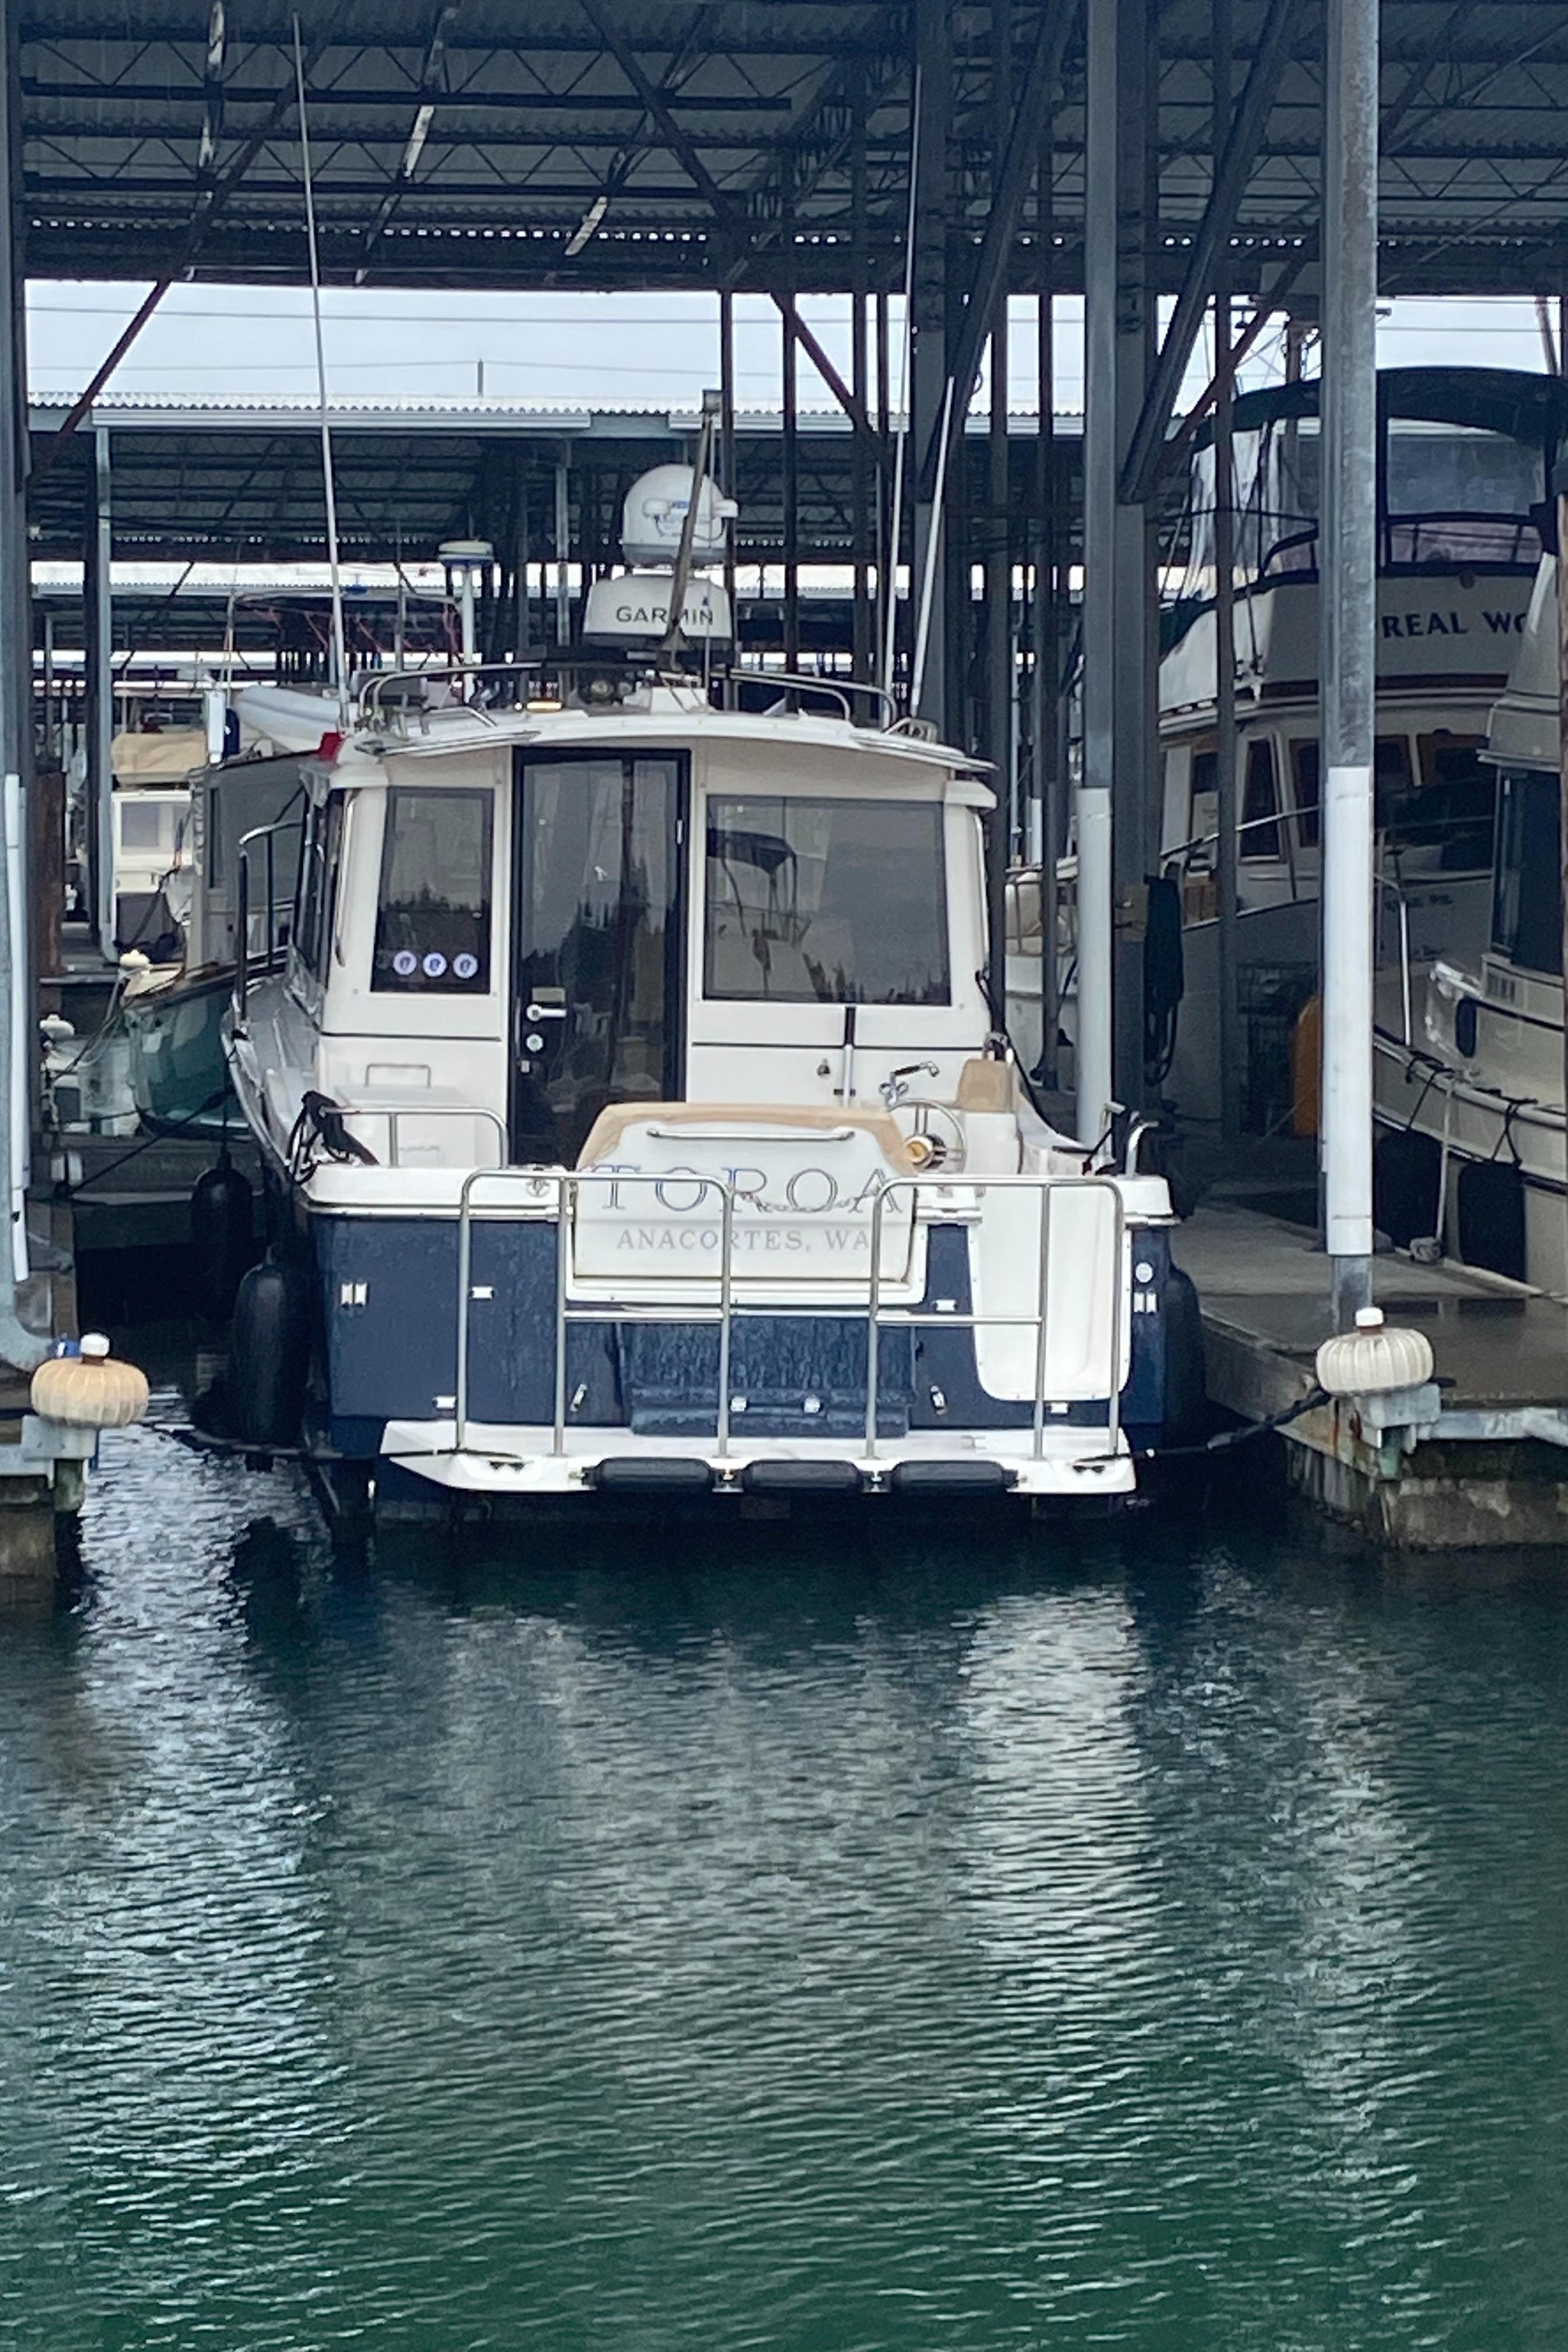 Used 2018 Cutwater 28, 98221 Anacortes - Boat Trader